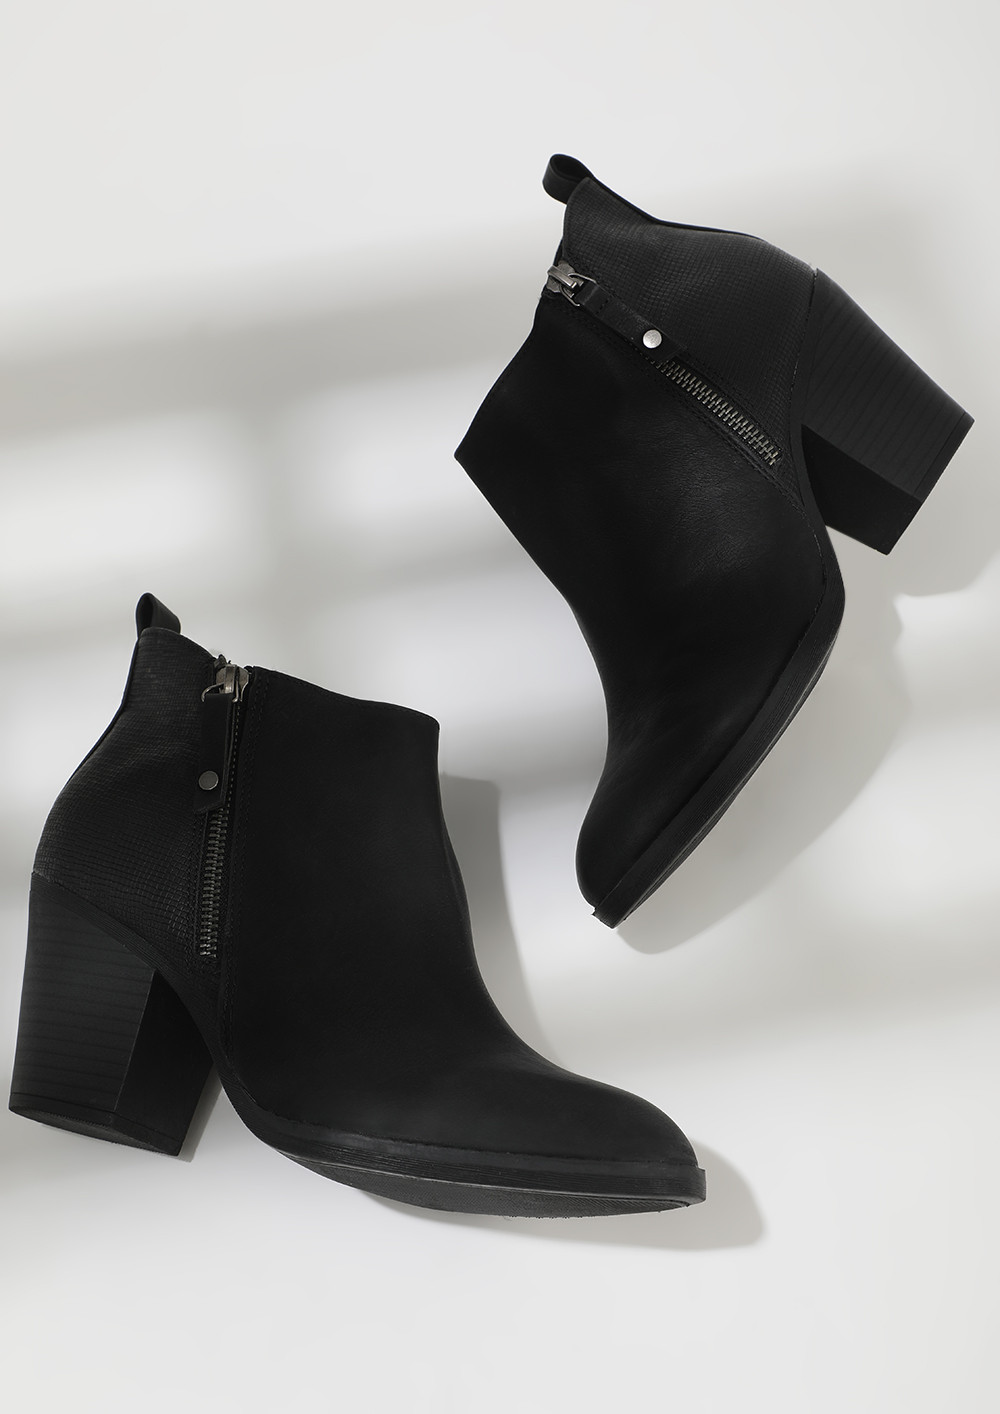 BOOT-A-HOLIC TEMPTATION BLACK ANKLE BOOTS